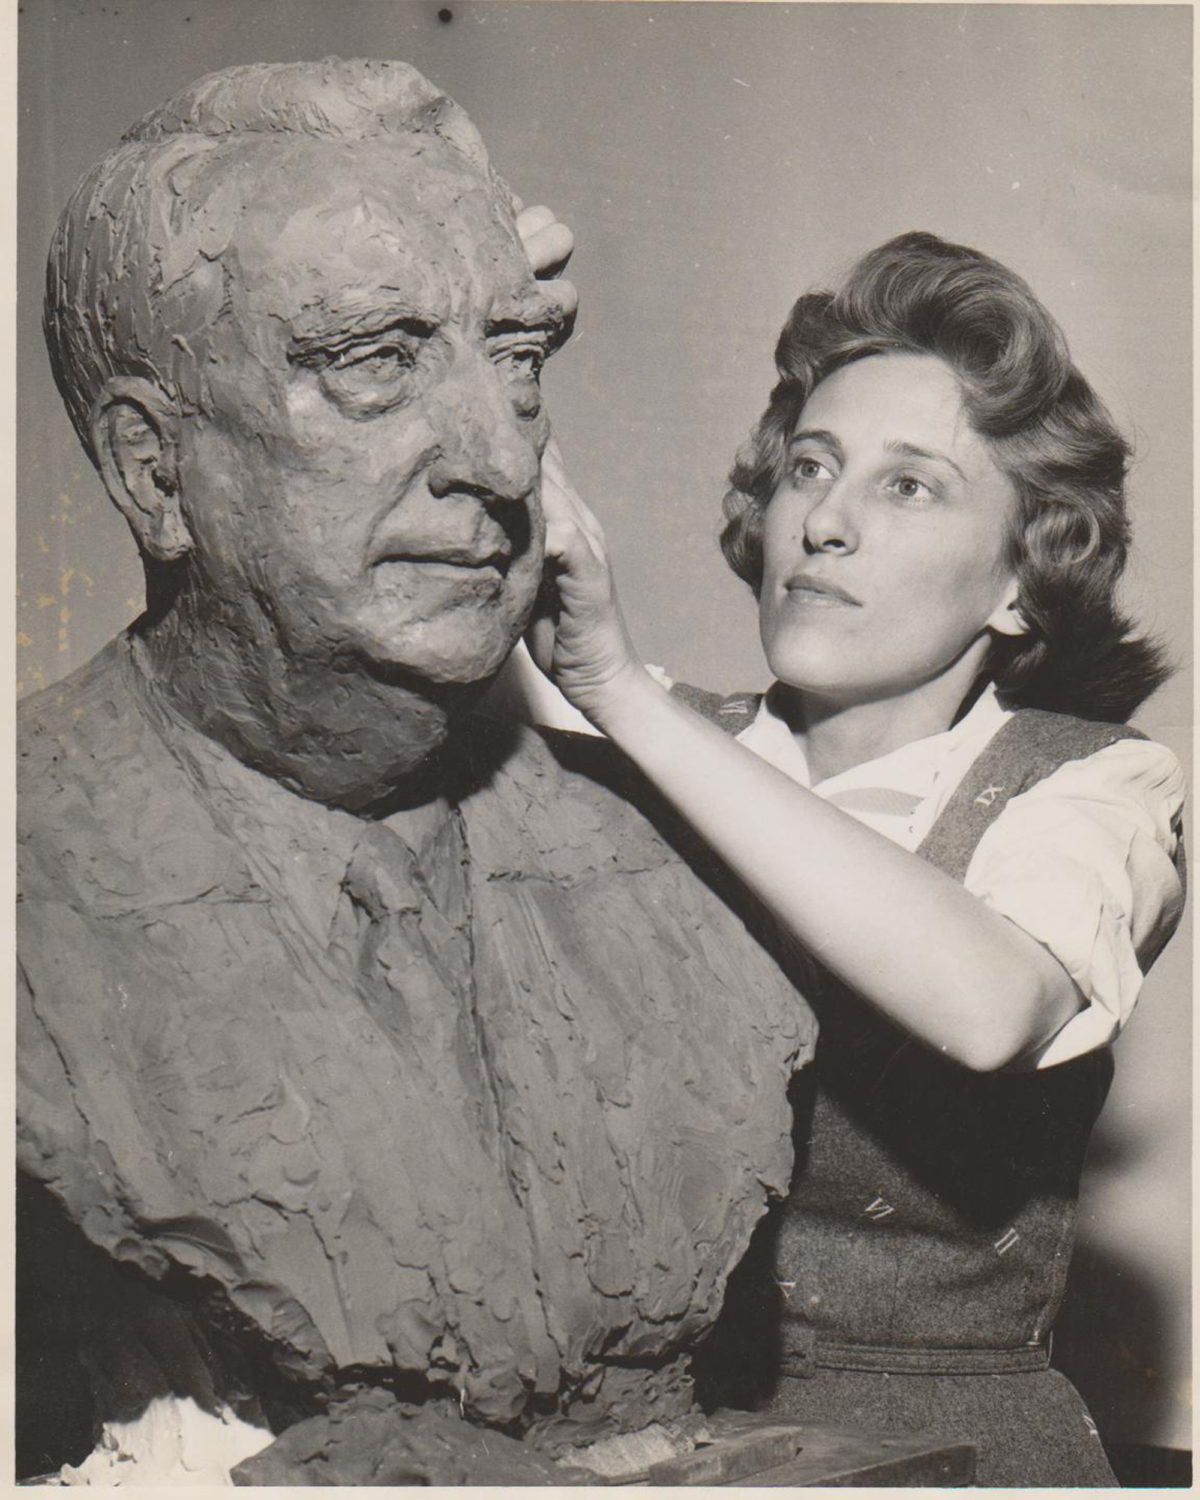 Jimilu Mason working on the bust of U.S. Chief Justice Frederick M. Vinson